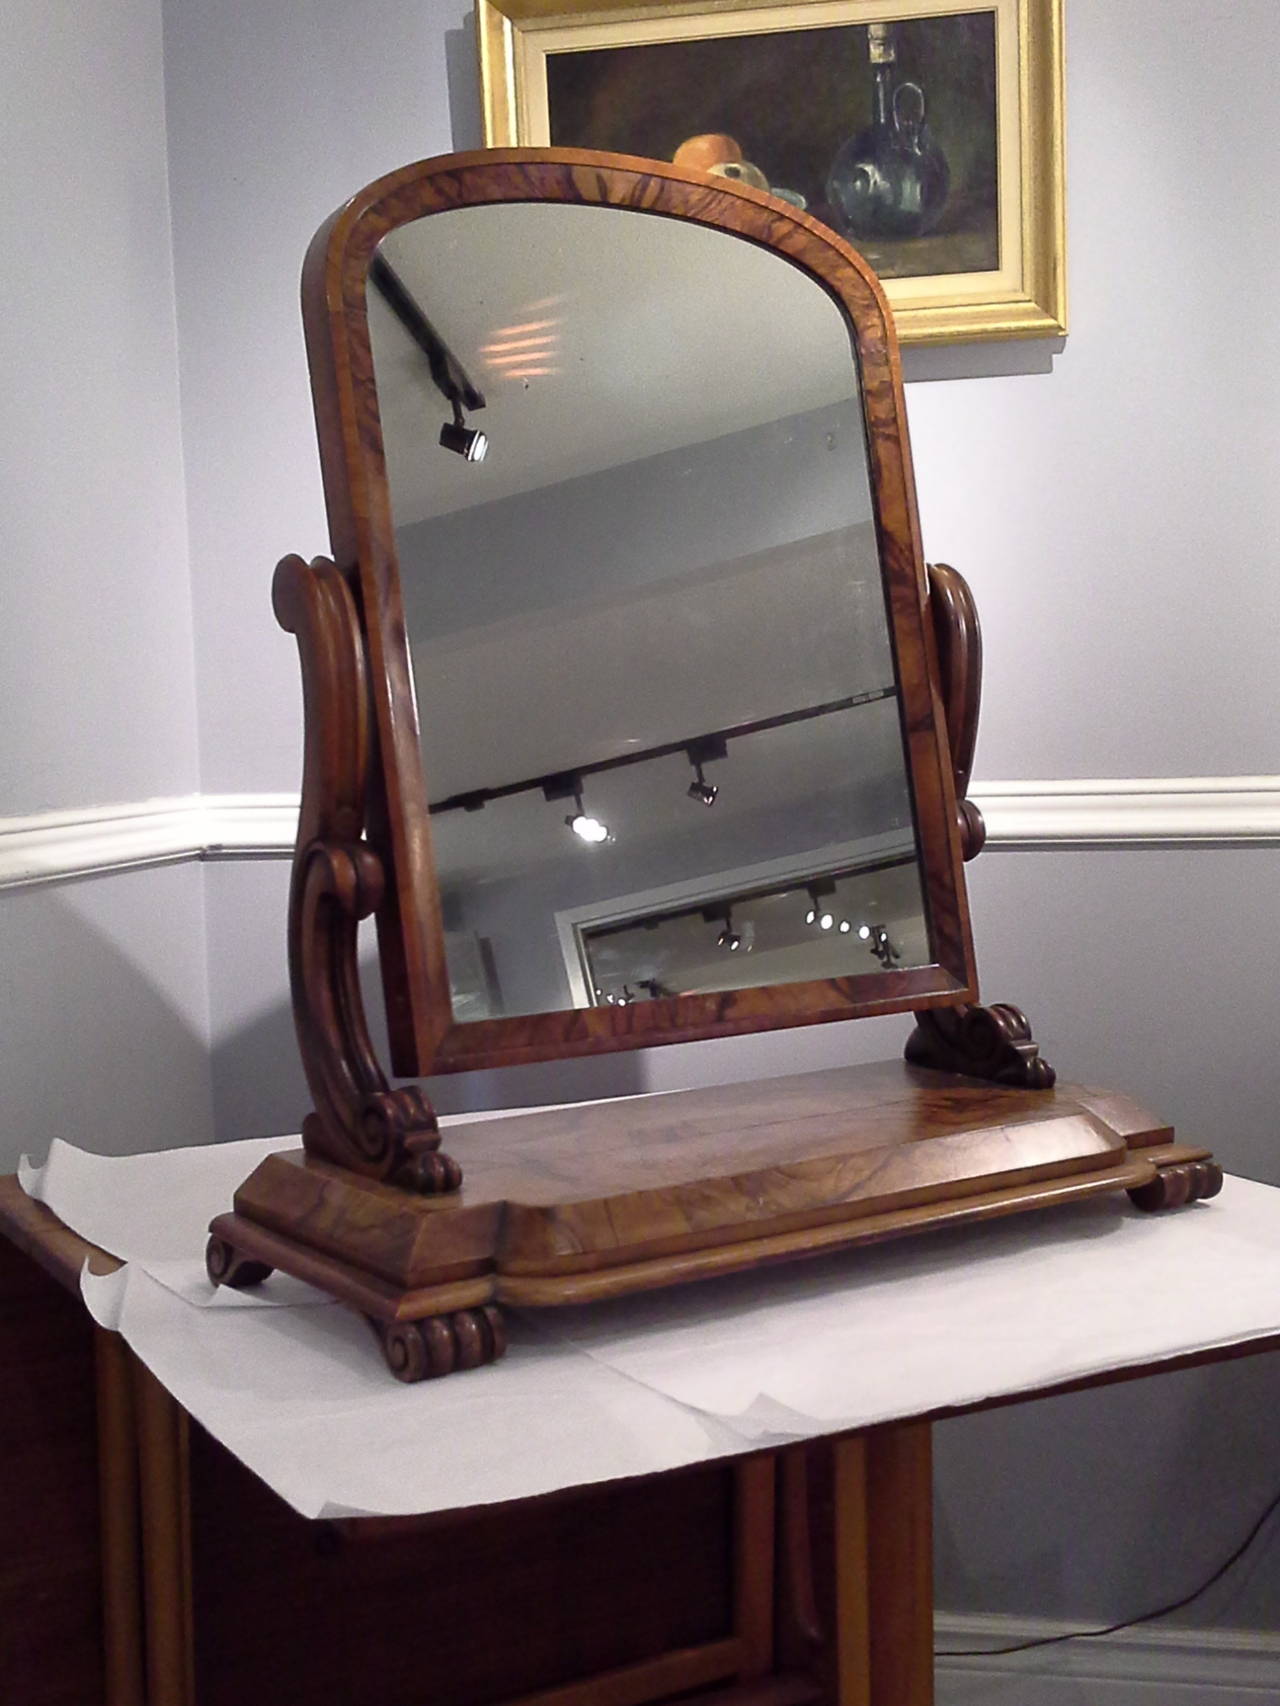 Burled Walnut Gentlemen's Dressing Mirror, On A Scrolled Bun Foot, The mirror is attached to a scrolled support arm and tilts to adjust height, Nice Burled walnut veneer, and patina, There is a light shrinkage split on top of the base, otherwise